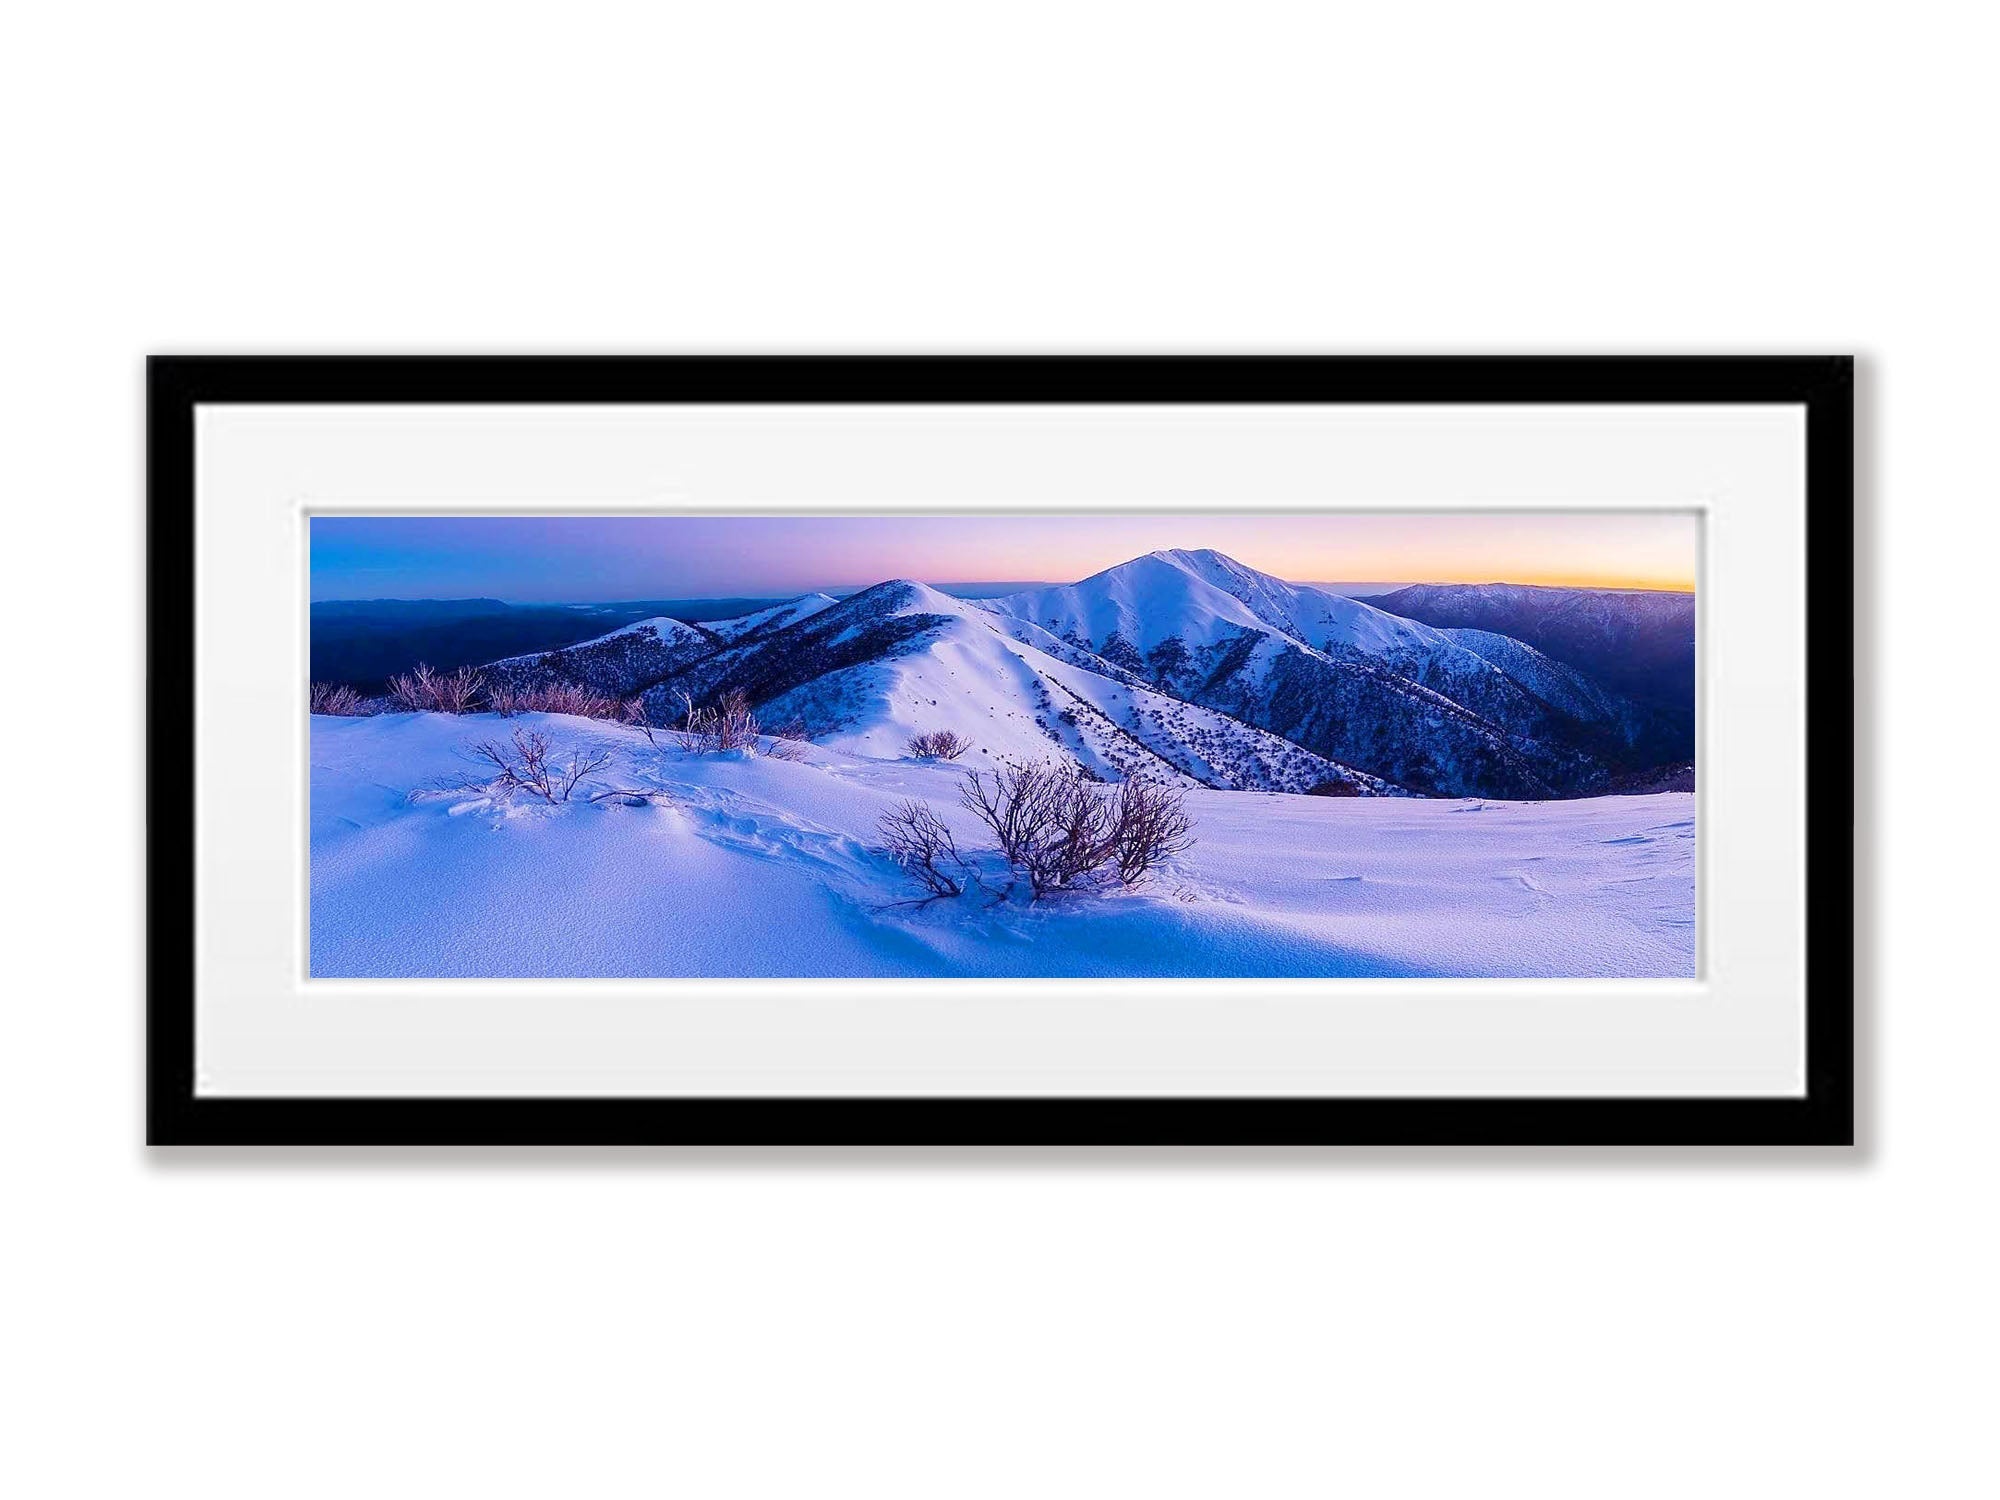 Feathertop Awakens, Mount Hotham, Victorian High Country